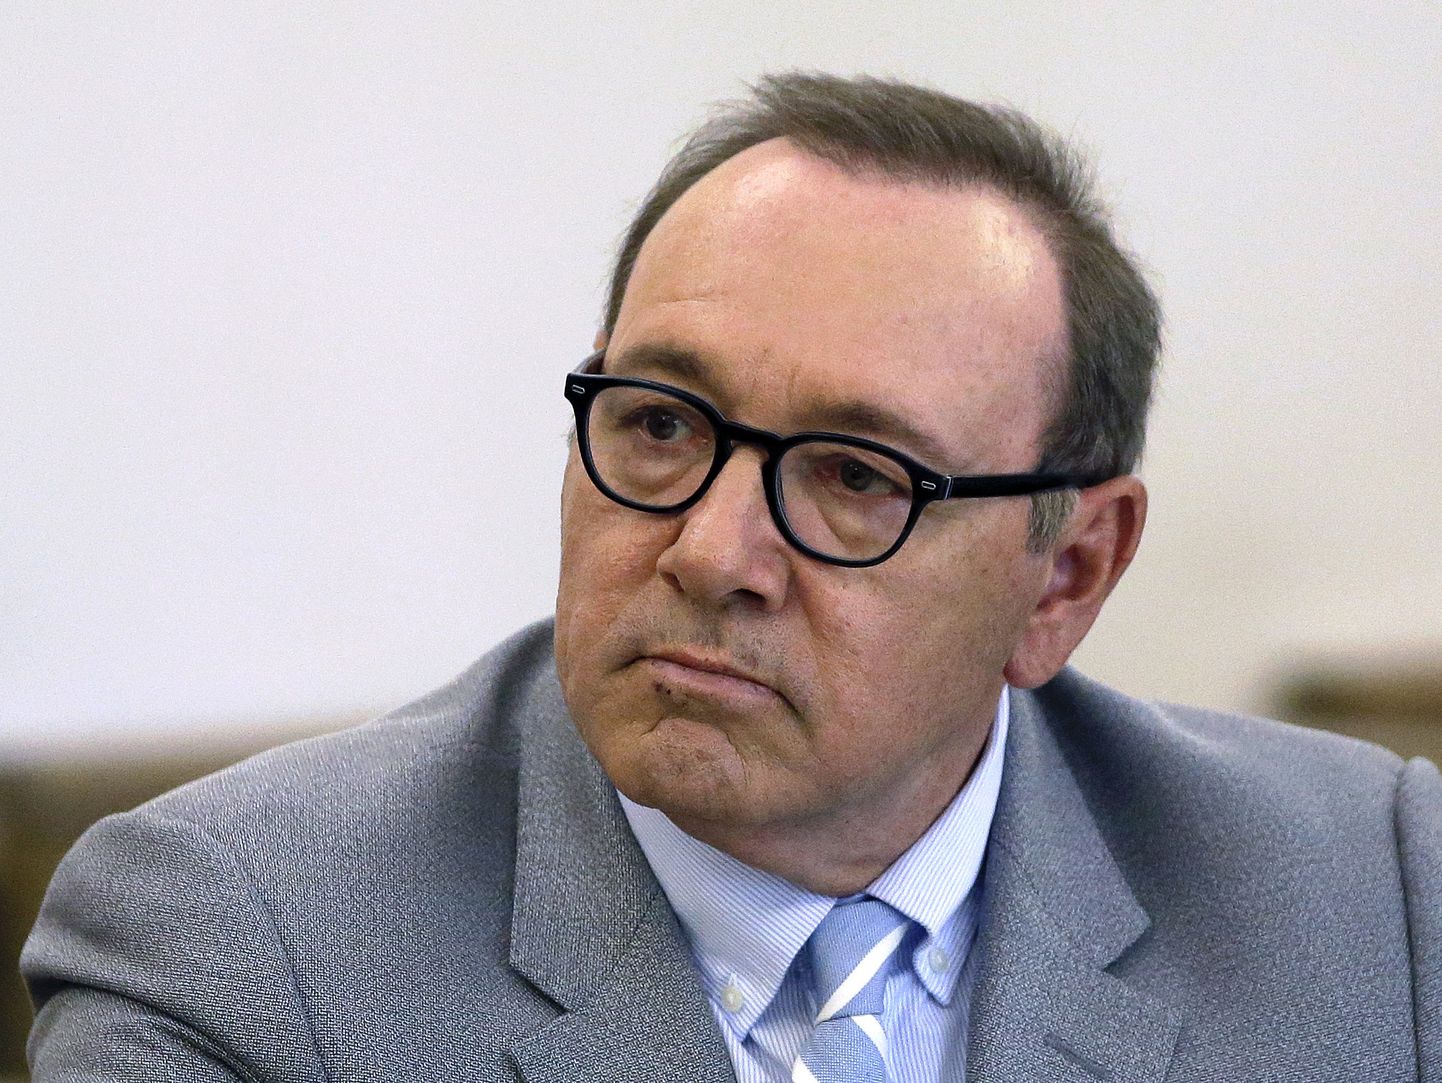 FILE - In this June 3, 2019 file photo, actor Kevin Spacey attends a pretrial hearing at district court in Nantucket, Mass. The Oscar-winning actor is accused of groping the teenage son of a former Boston TV anchor in 2016 in the crowded bar at the Club Car in Nantucket. An attorney for the man who has accused Spacey says, Wednesday, June 19, 2019, that the man cannot find a cellphone he has been ordered to turn over to the defense. Spacey's lawyers want to try to recover text messages they say would help the actor's case. (AP Photo/Steven Senne)